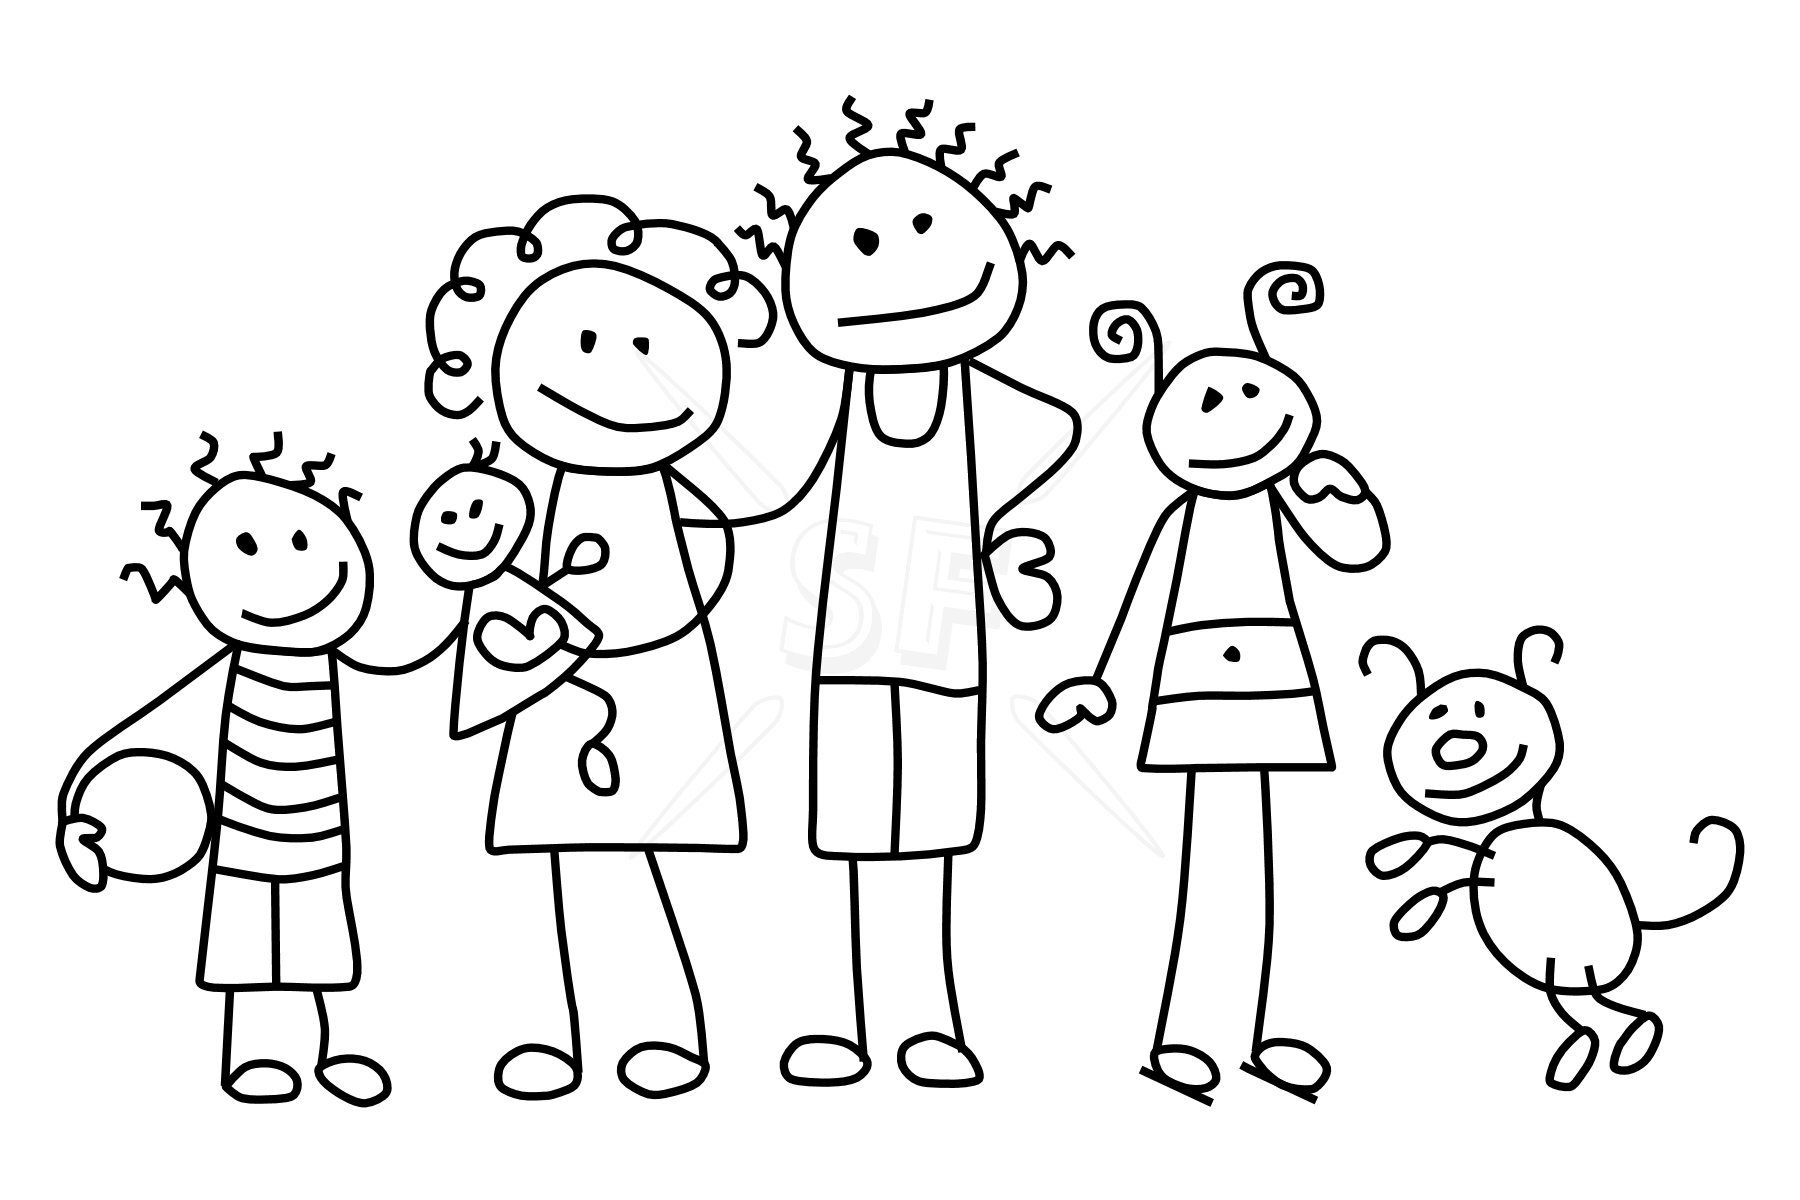 People clip art black and white 